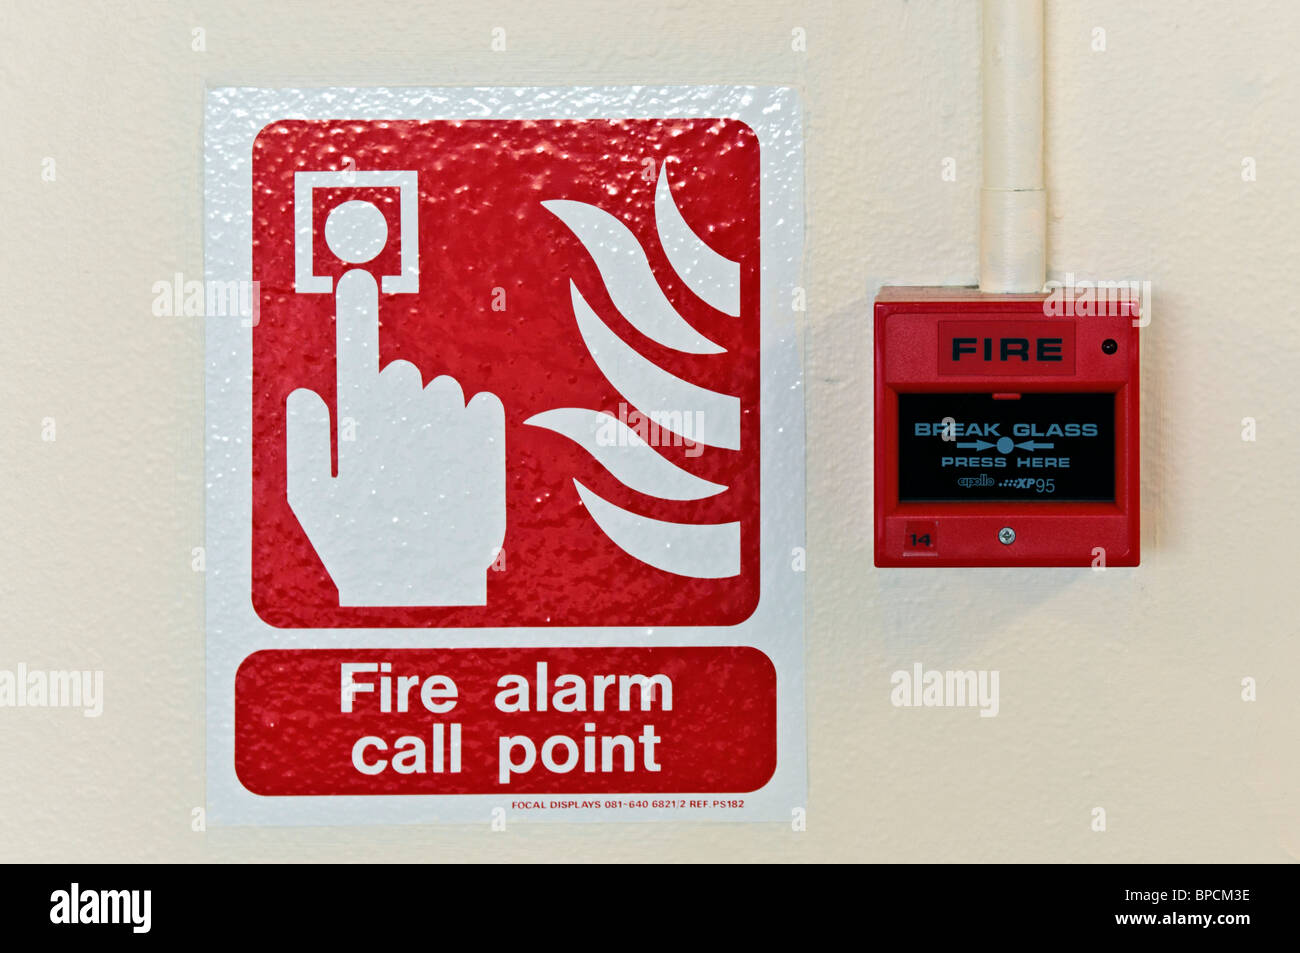 Fire Alarm Call Point Sign 100mm x 100mm Photo Rigid Plastic Excellent Quality 